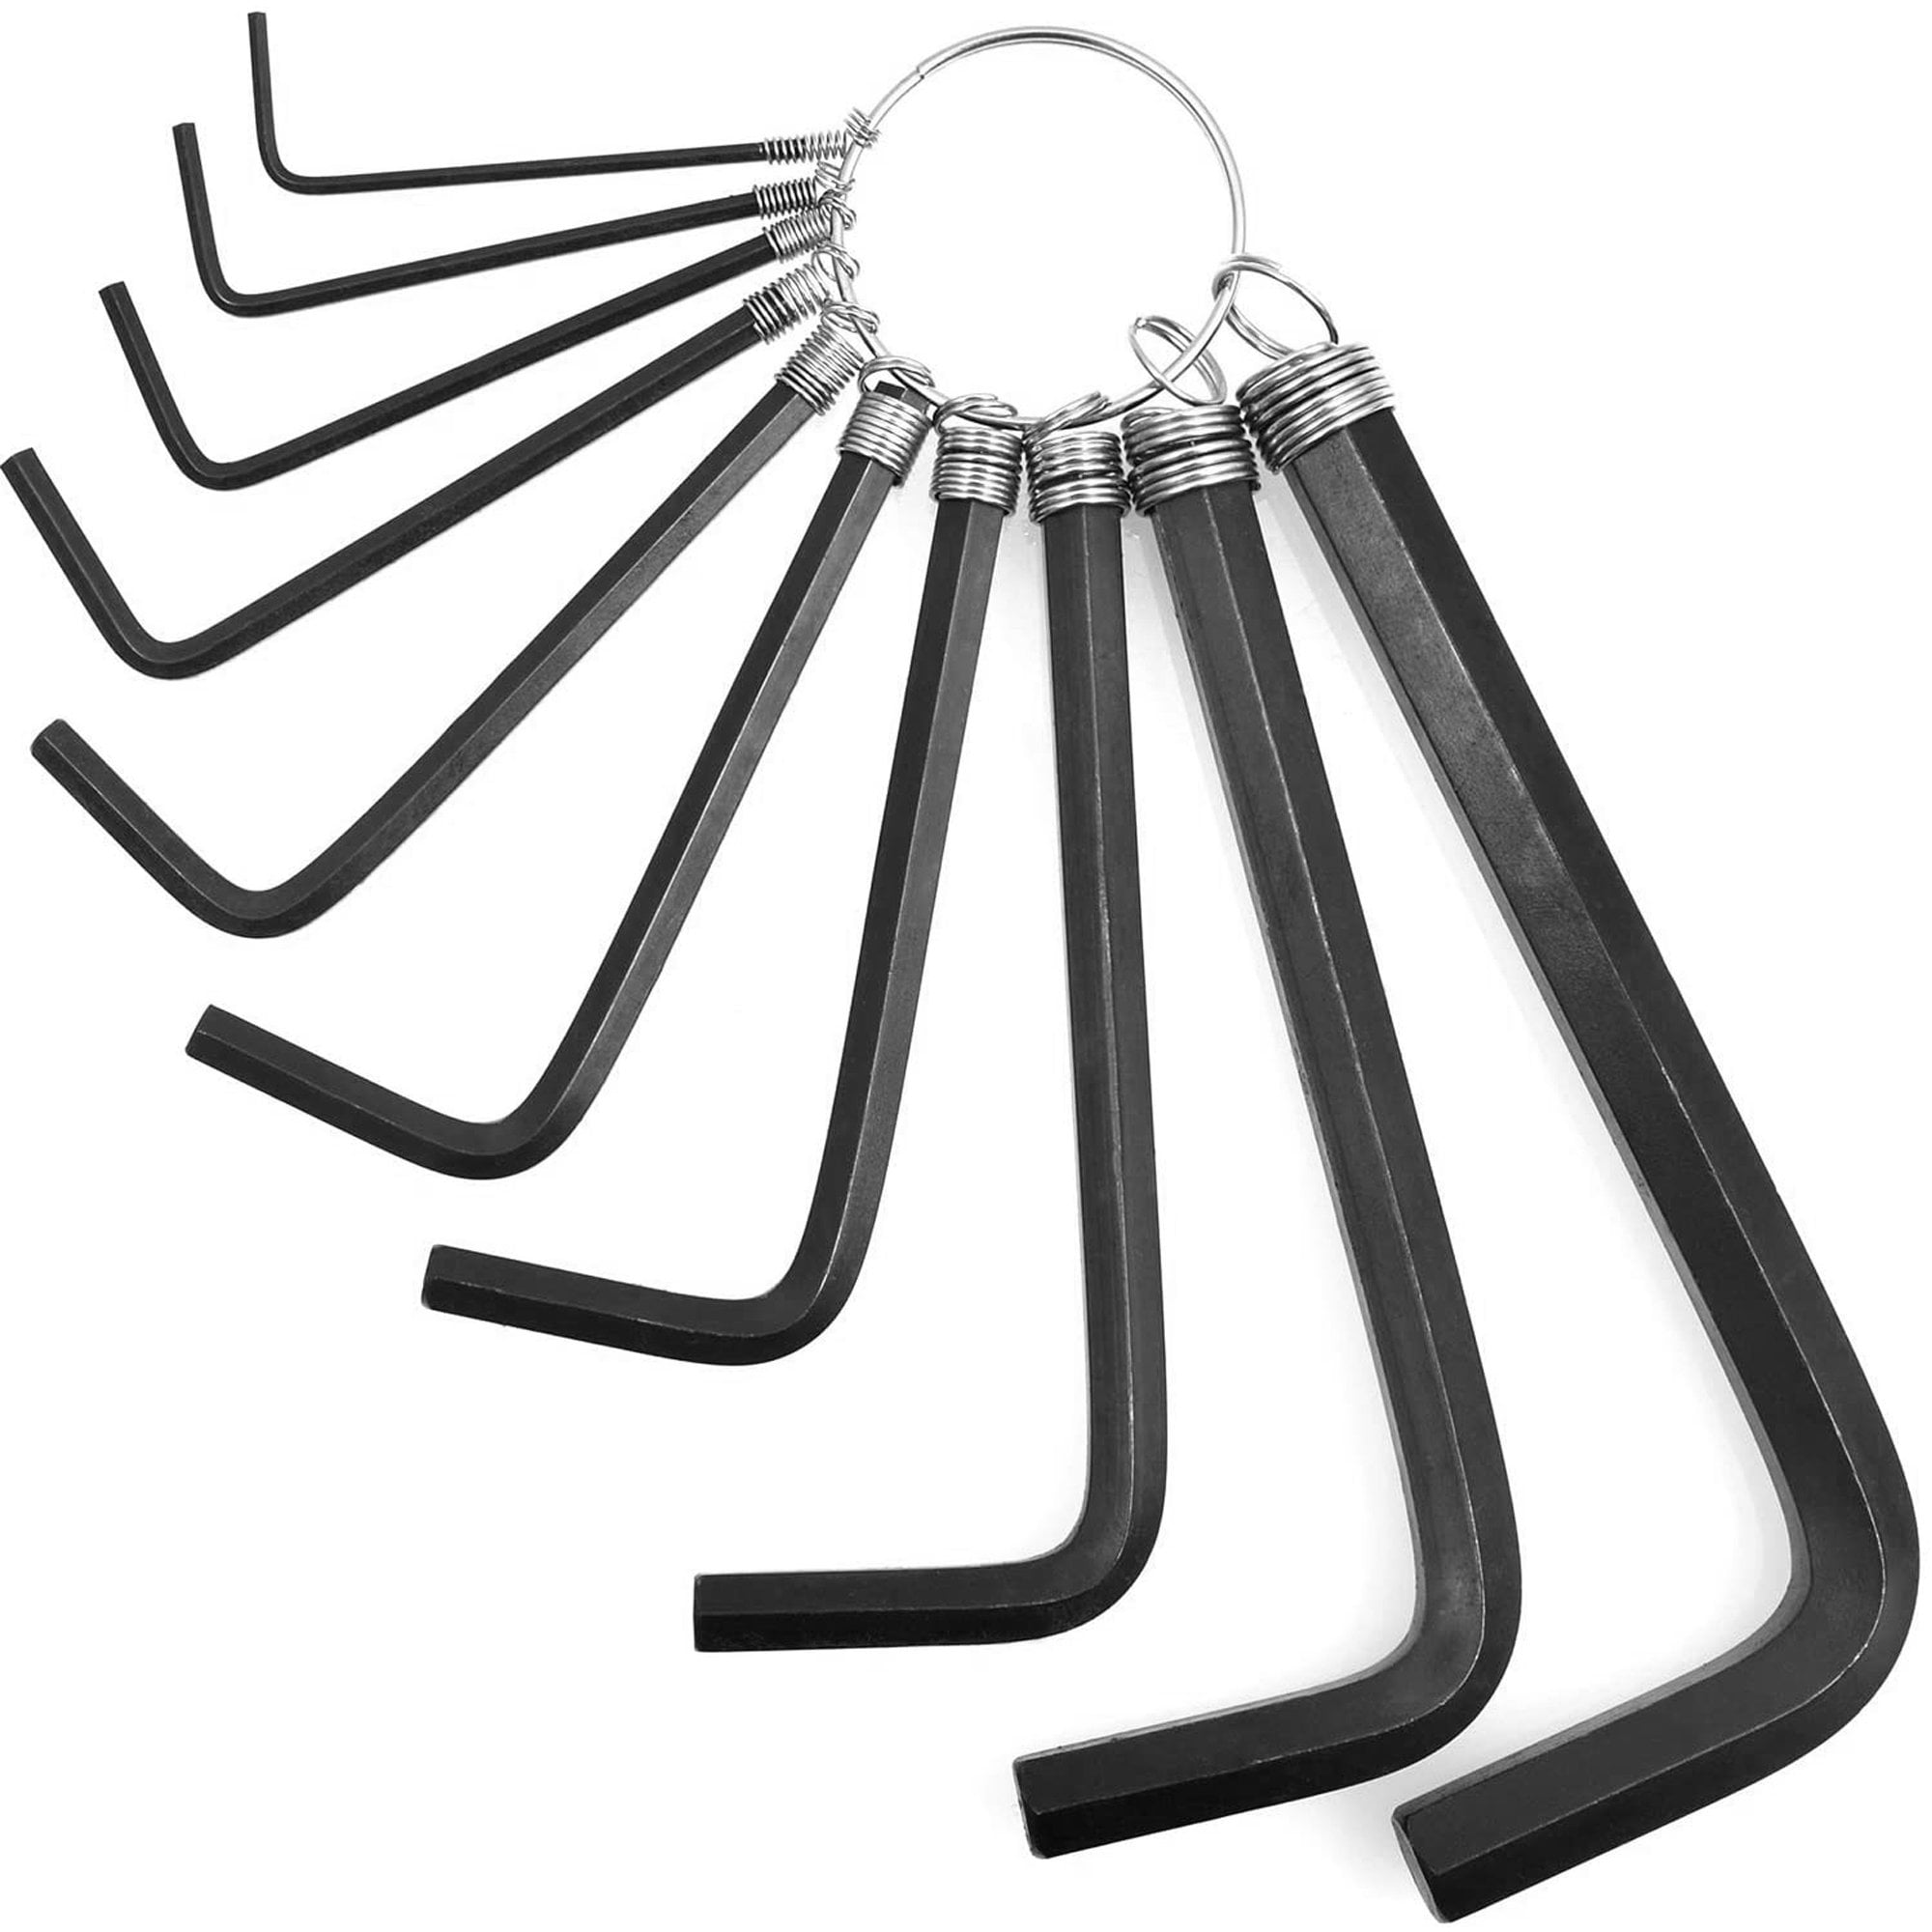 8 pc Hex Key Ring Set The WORKS FOLDABLE Allen Wrench Pocket Tool BRAND NEW 